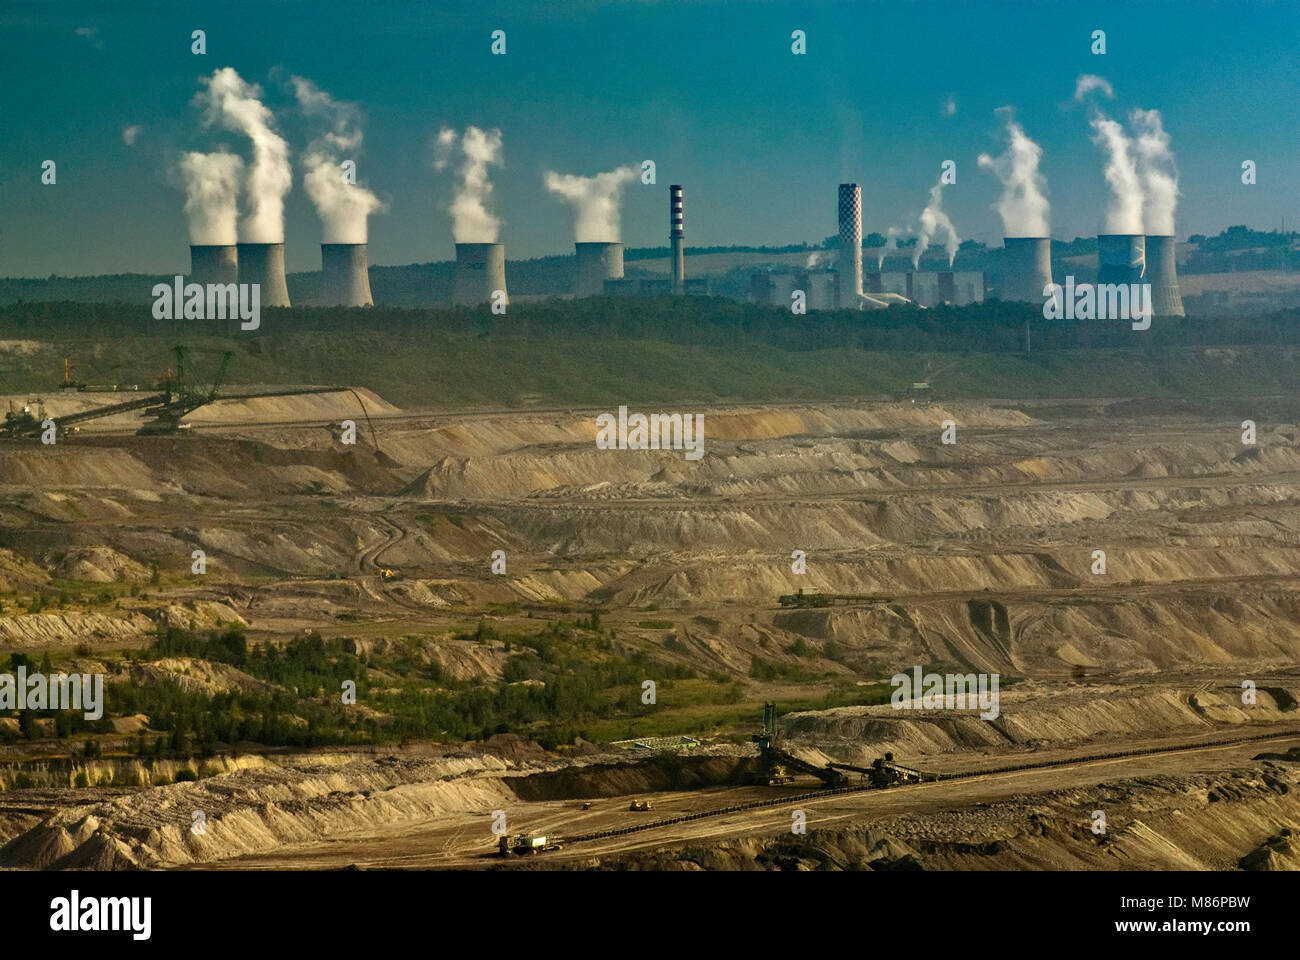 Cooling towers and chimney stacks at Turow thermal power plant over open-pit brown coal mine near Bogatynia in Lower Silesia region, Poland Stock Photo